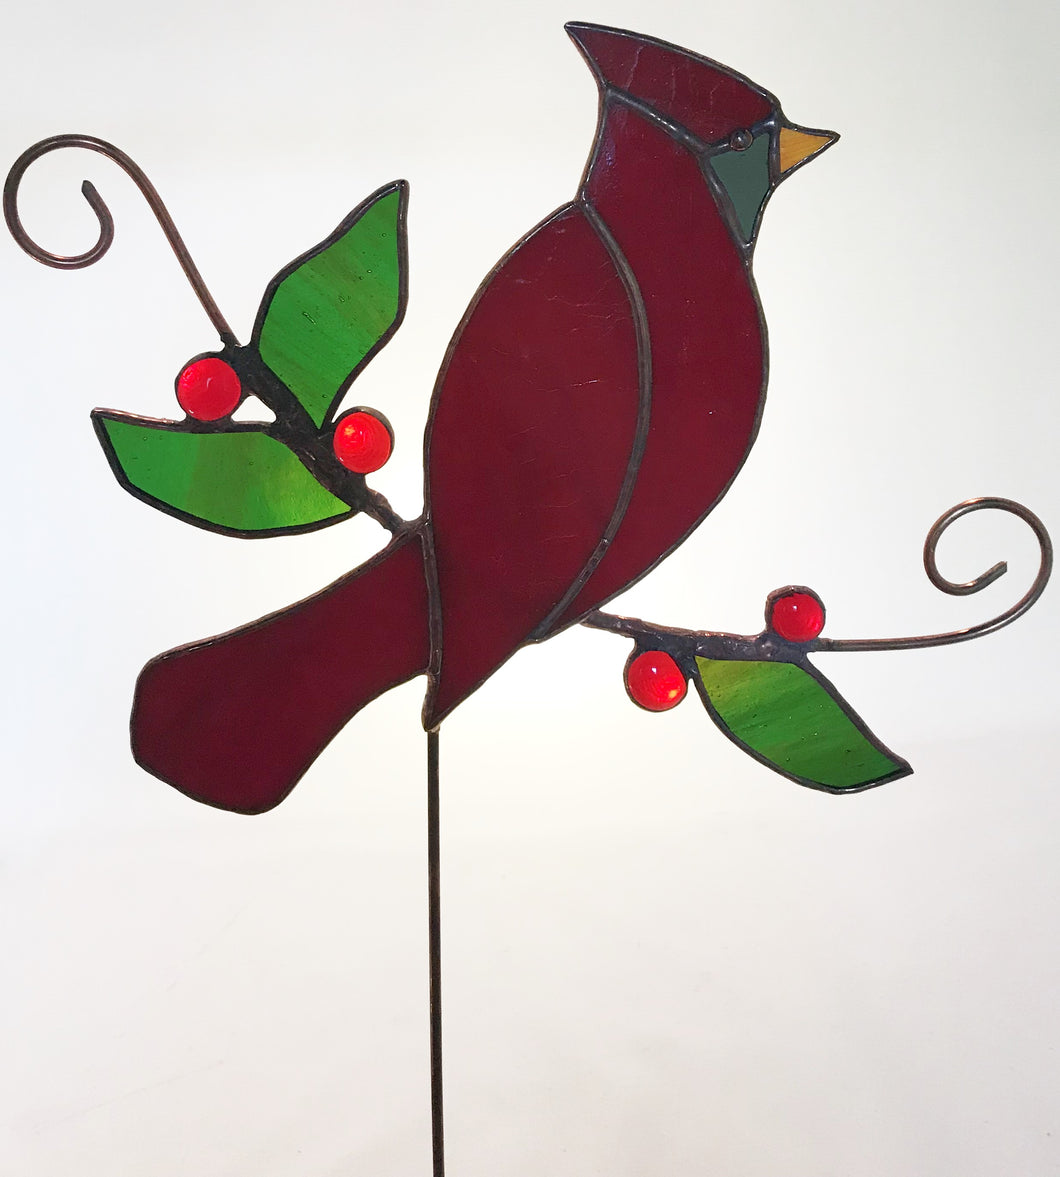 Large Bird with Leaves and Berries on Stick $65